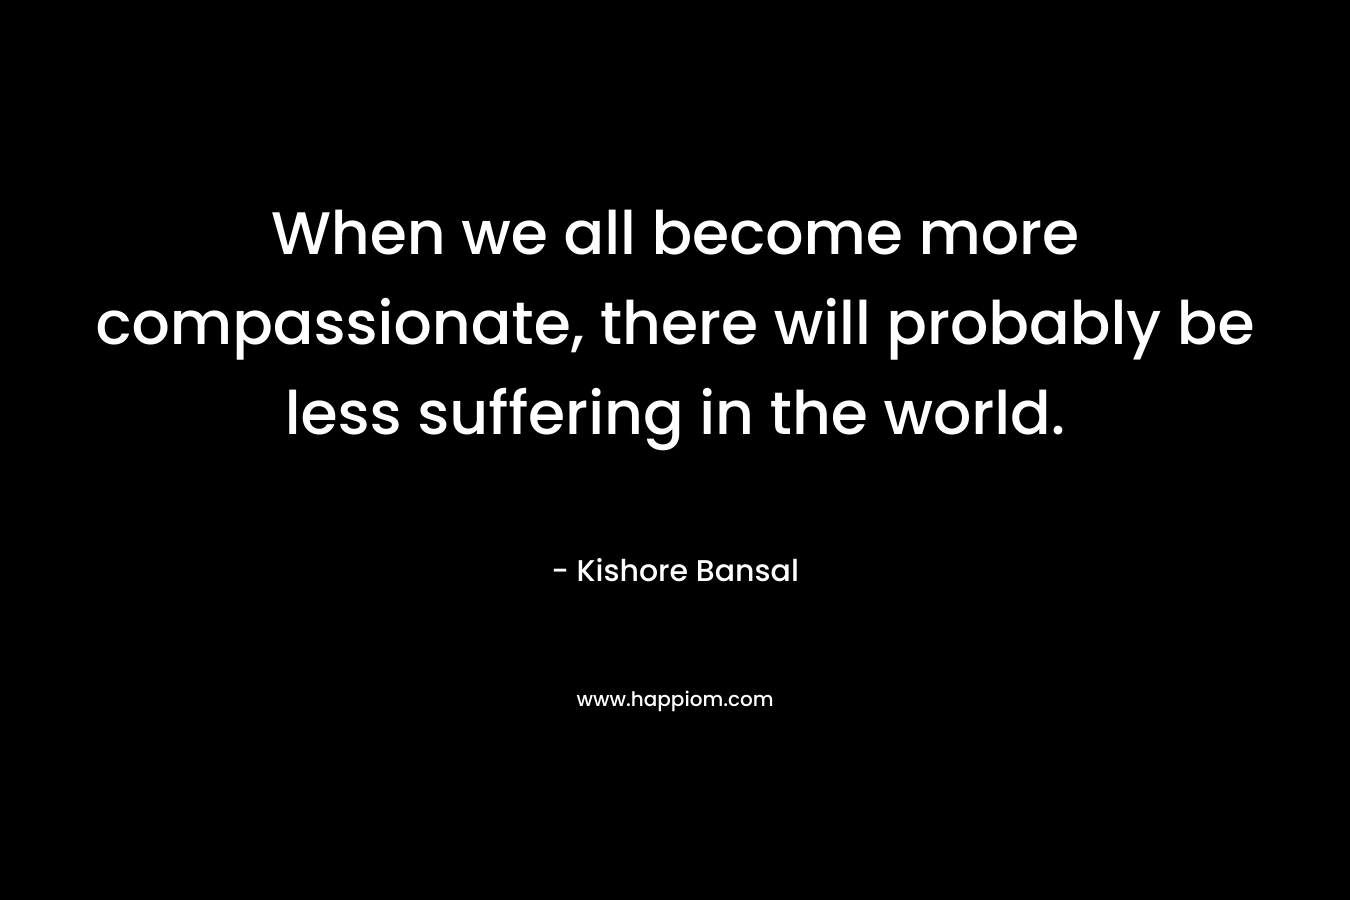 When we all become more compassionate, there will probably be less suffering in the world. – Kishore Bansal